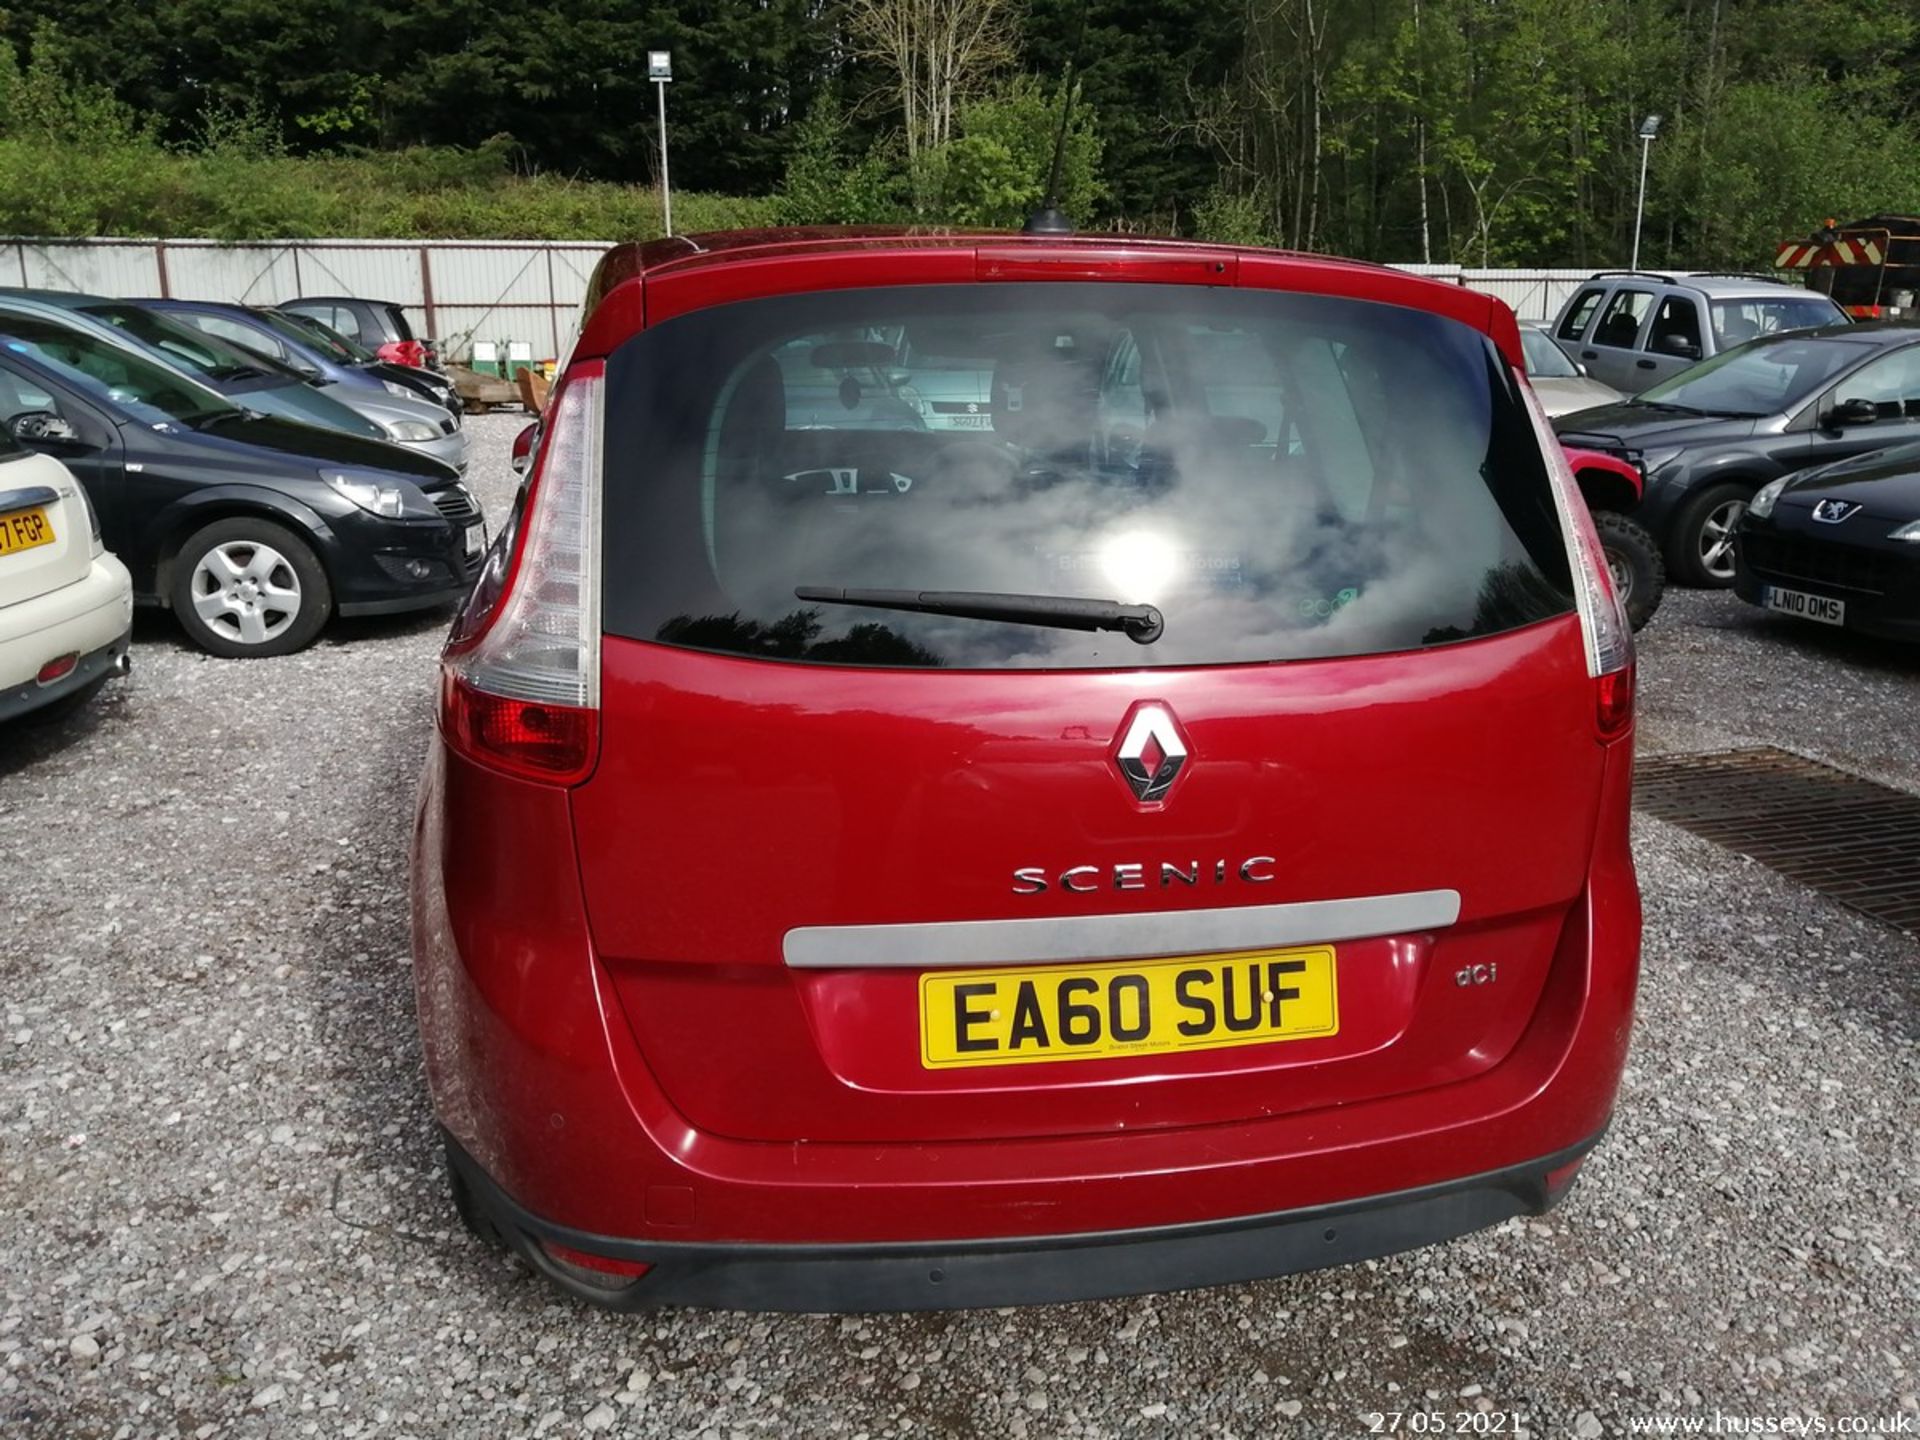 10/60 RENAULT GRD SCENIC PRIV-GE T-T DC - 1461cc 5dr MPV (Red) - Image 6 of 11